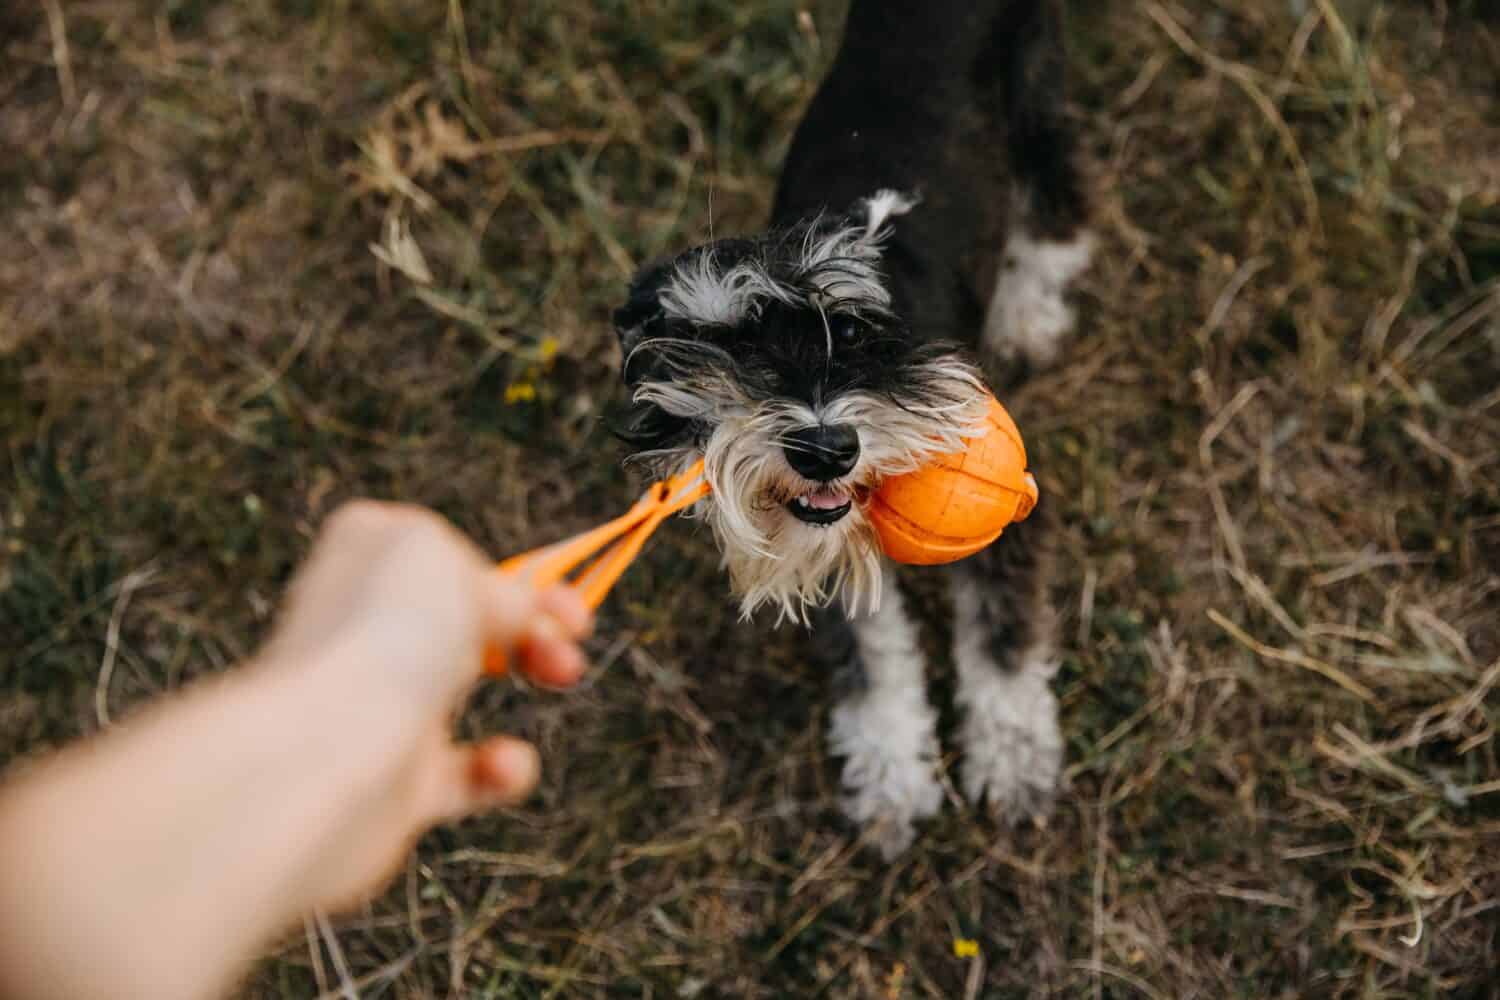 miniature schnauzer purebred dog playing with an orange ball outdoors.